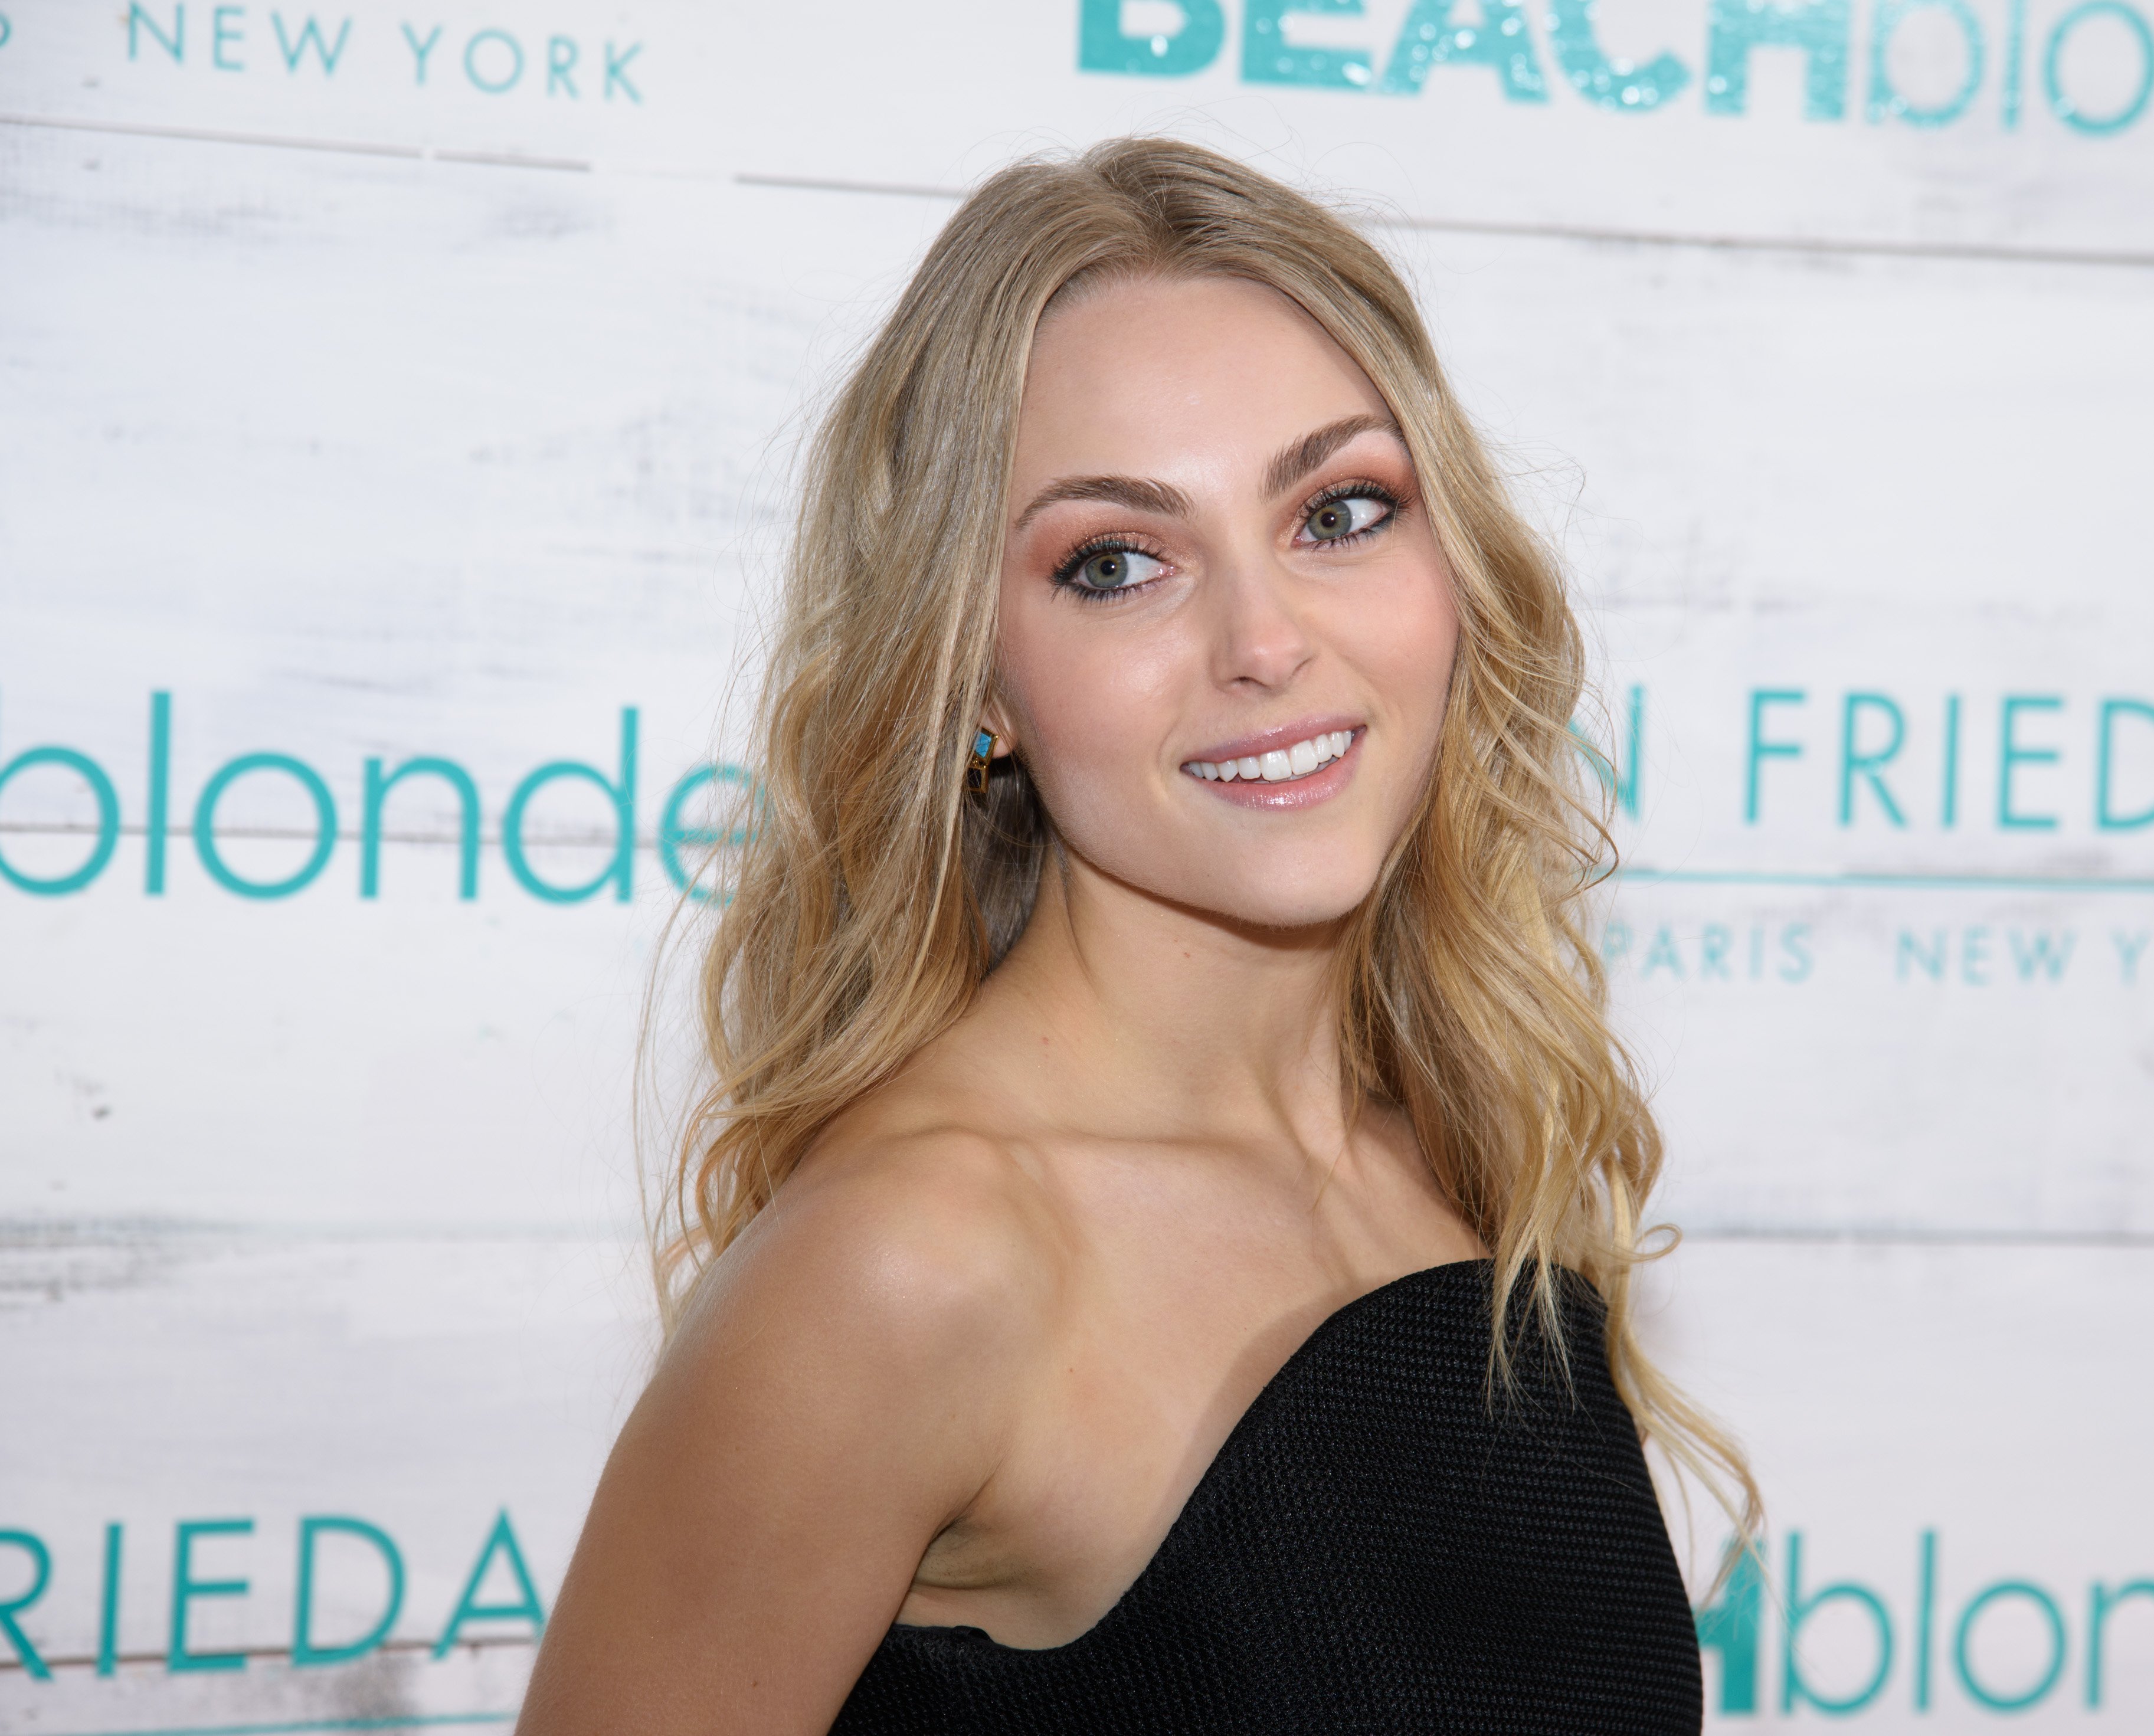 AnnaSophia Robb attends the John Frieda Hair Care Beach Blonde Collection Party at the Garage on February 5, 2015 in New York City | Photo: Getty Images